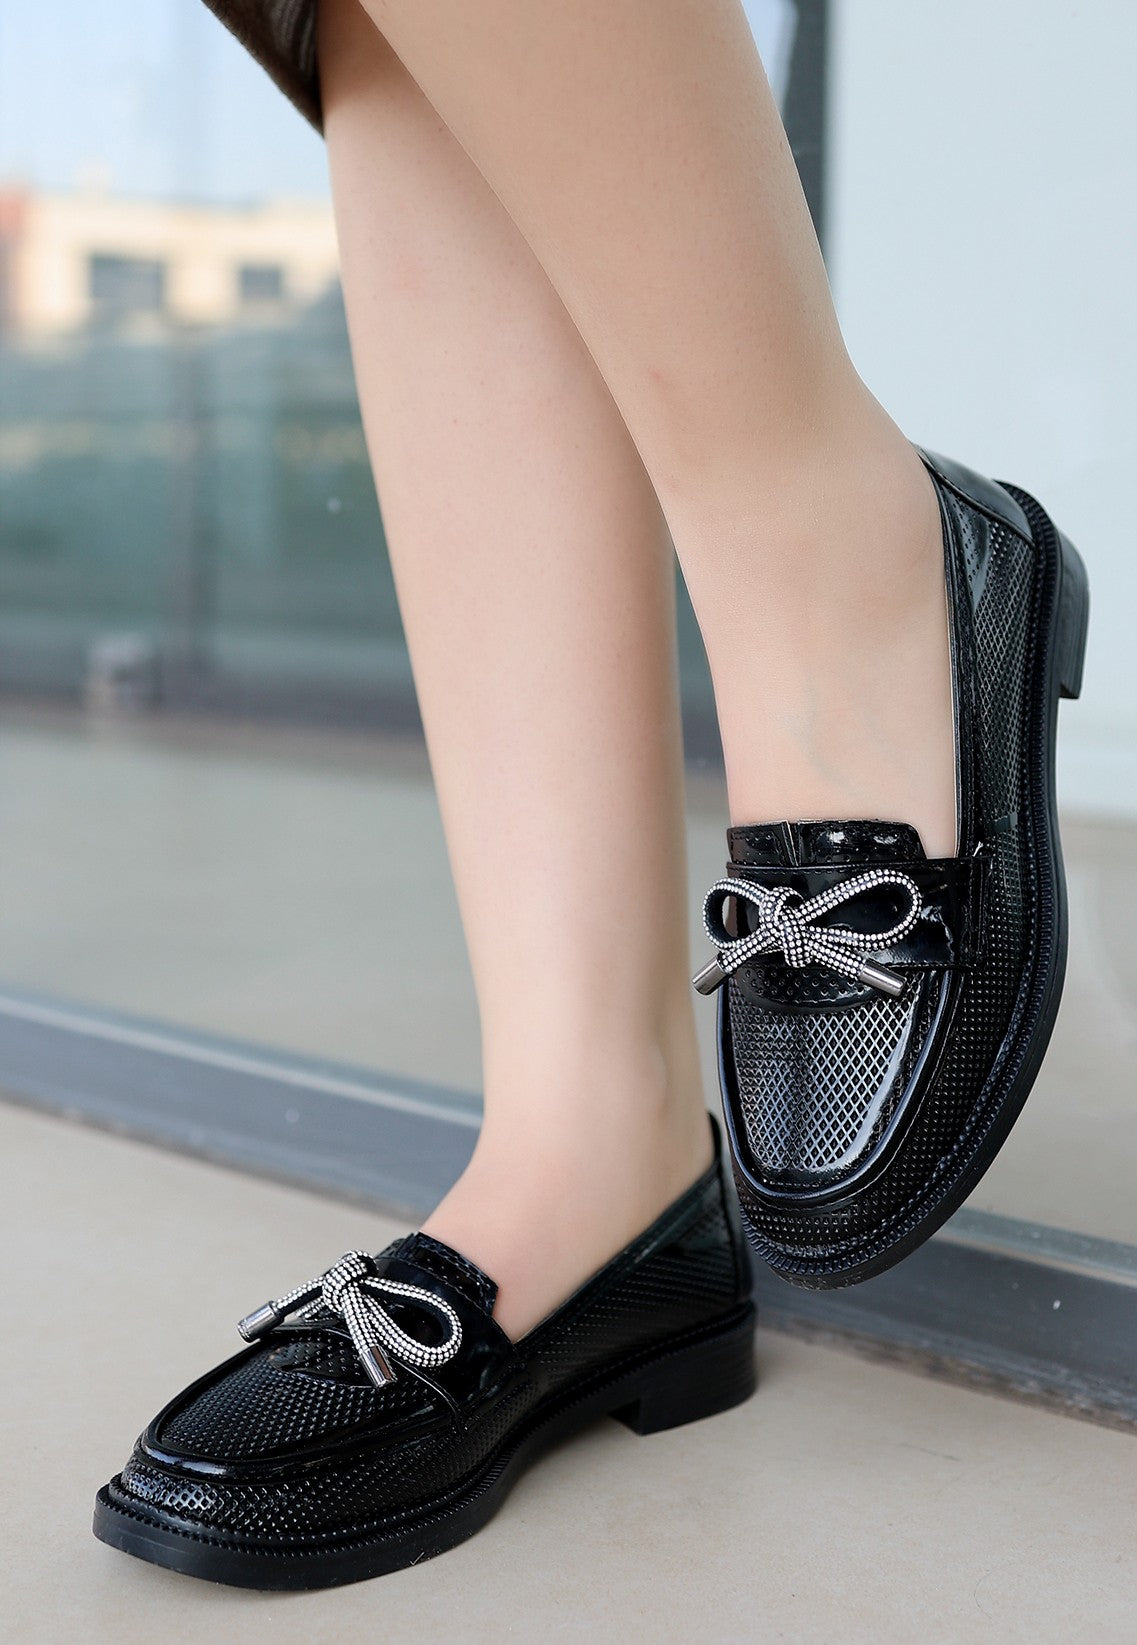 Women's Chay Black Patent Leather Ballerina Shoes - STREETMODE ™